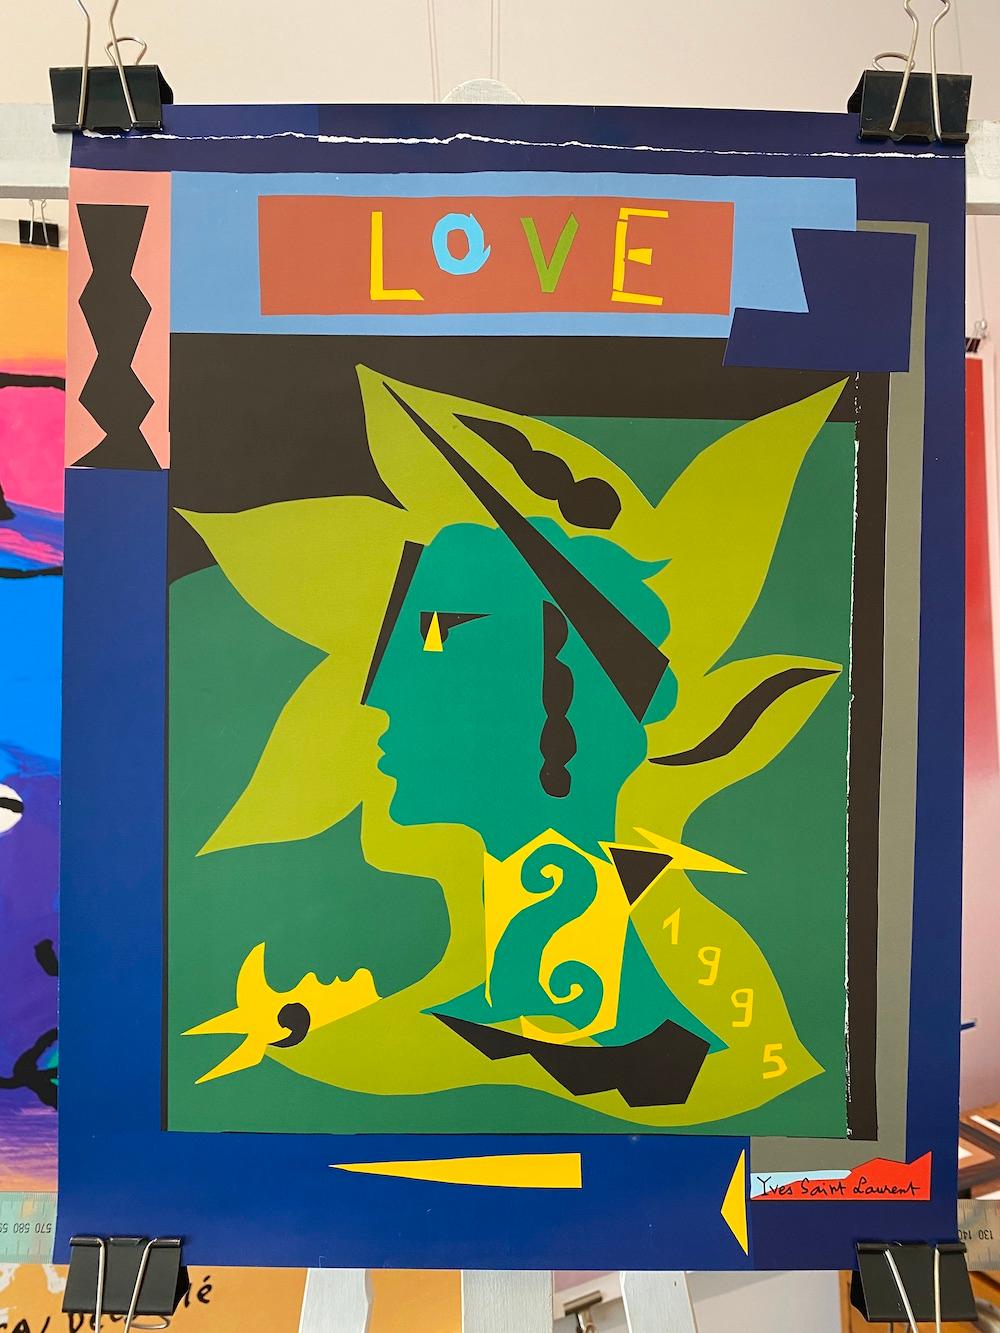 Yves Saint Laurent 'LOVE 1995' Original Vintage Poster  

In 1970, Yves Saint Laurent designed the first in a series of greeting cards in poster form that he would send his friends, collaborators, and clients annually until 2007. Every year, Saint